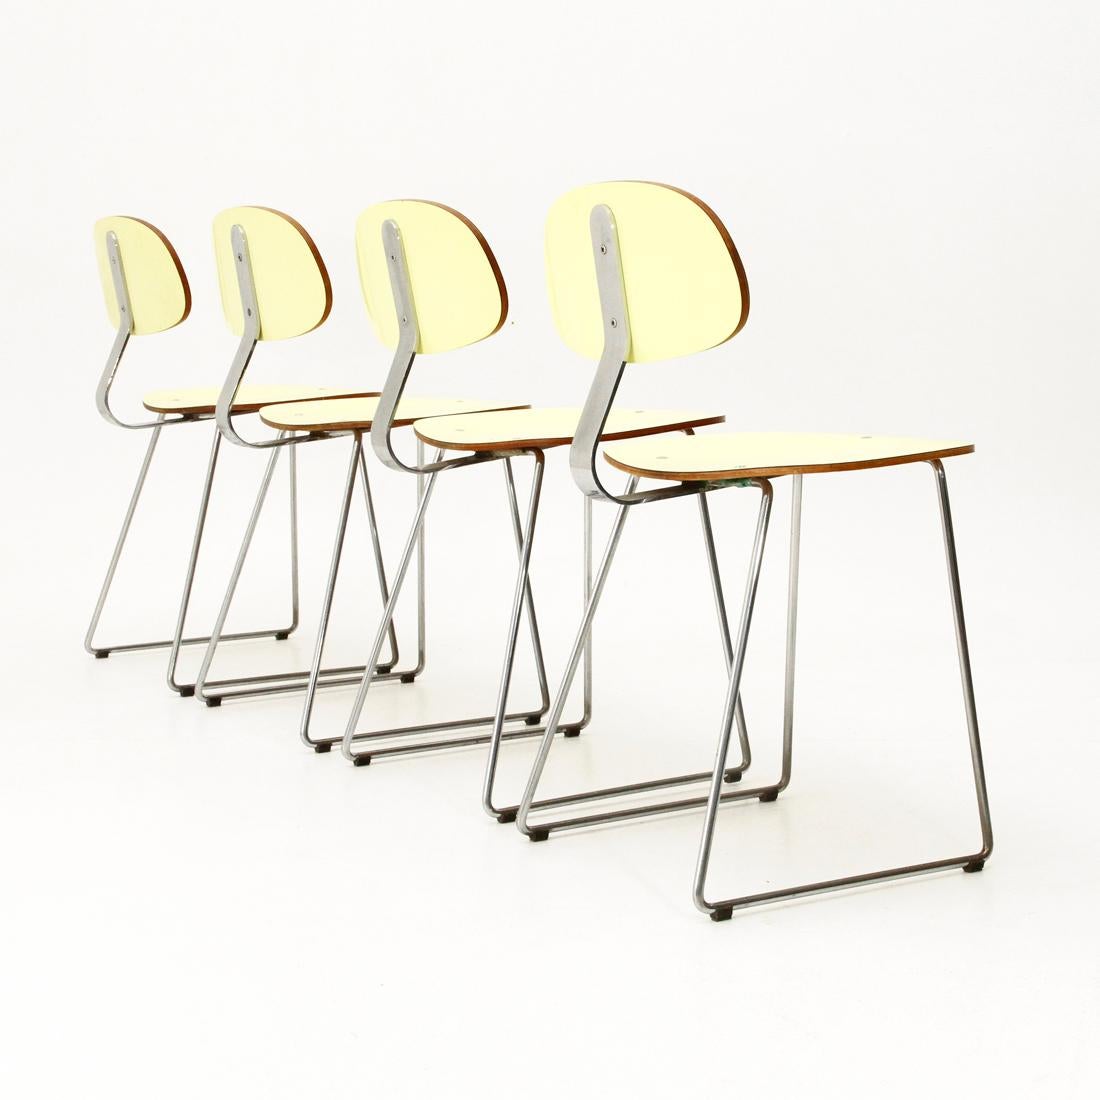 Italian 4 Chairs in Yellow Formica by Georges Coslin for 3V Arredamenti, 1950s